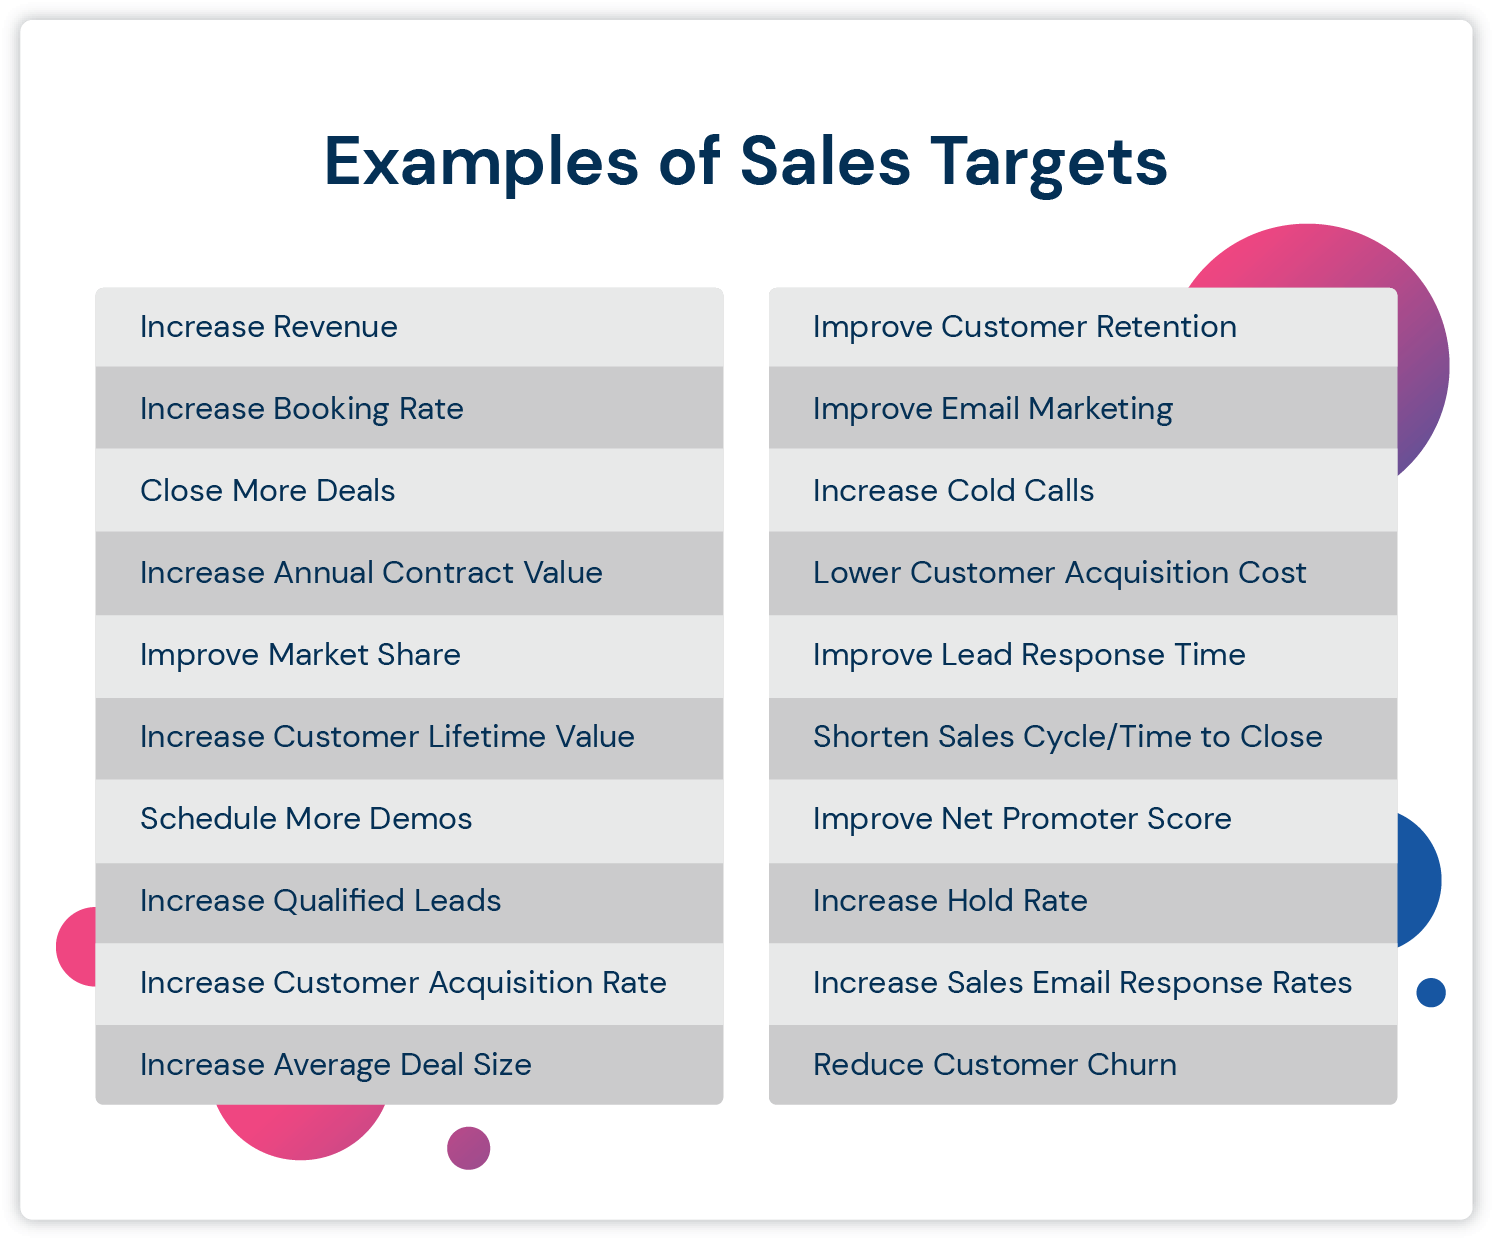 20 examples of sales targets in a charted list